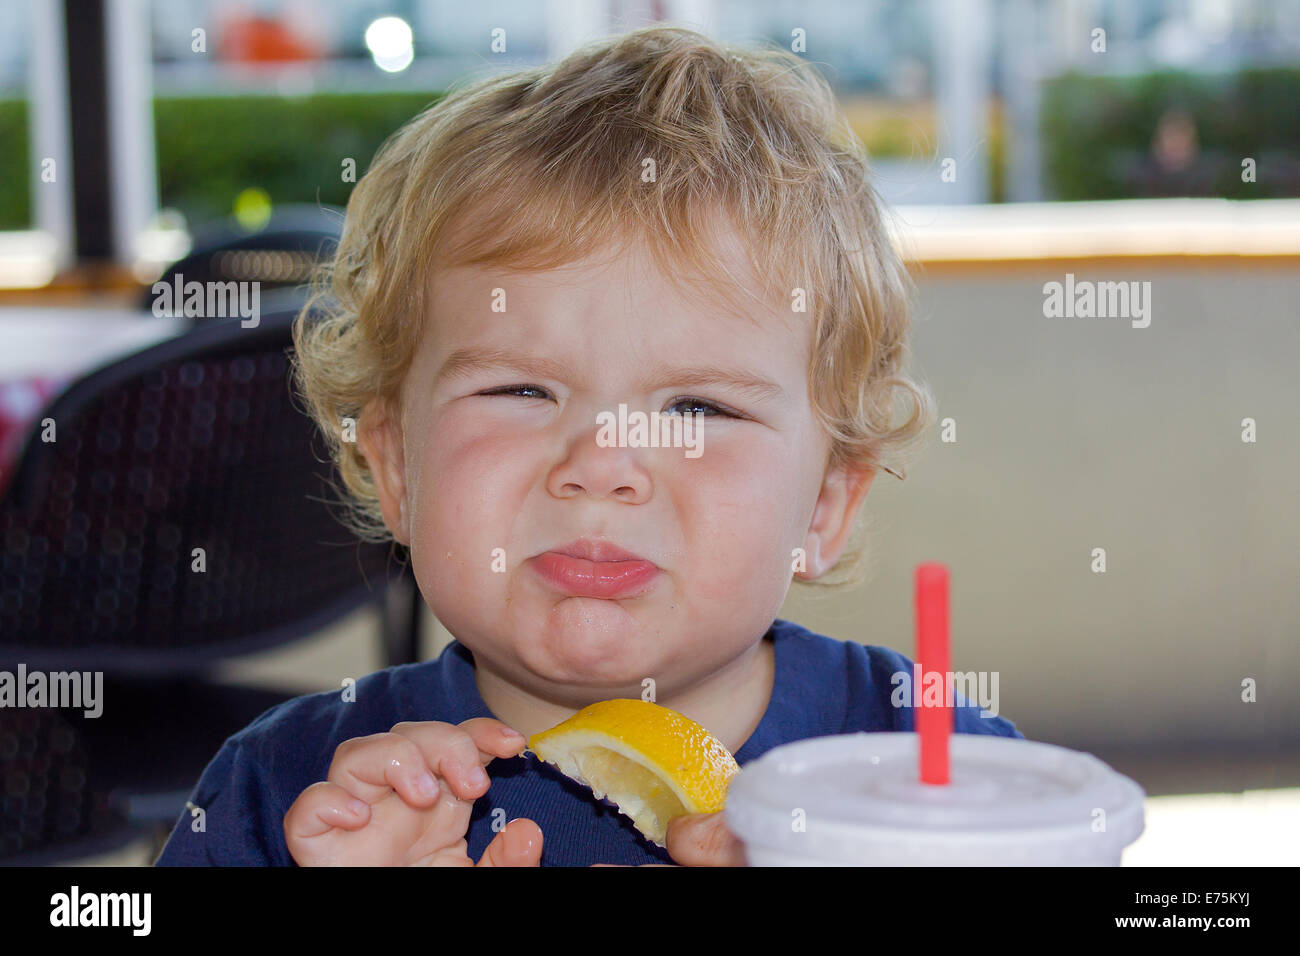 Sourpuss- Little boy trying out a lemon for the first time. Stock Photo